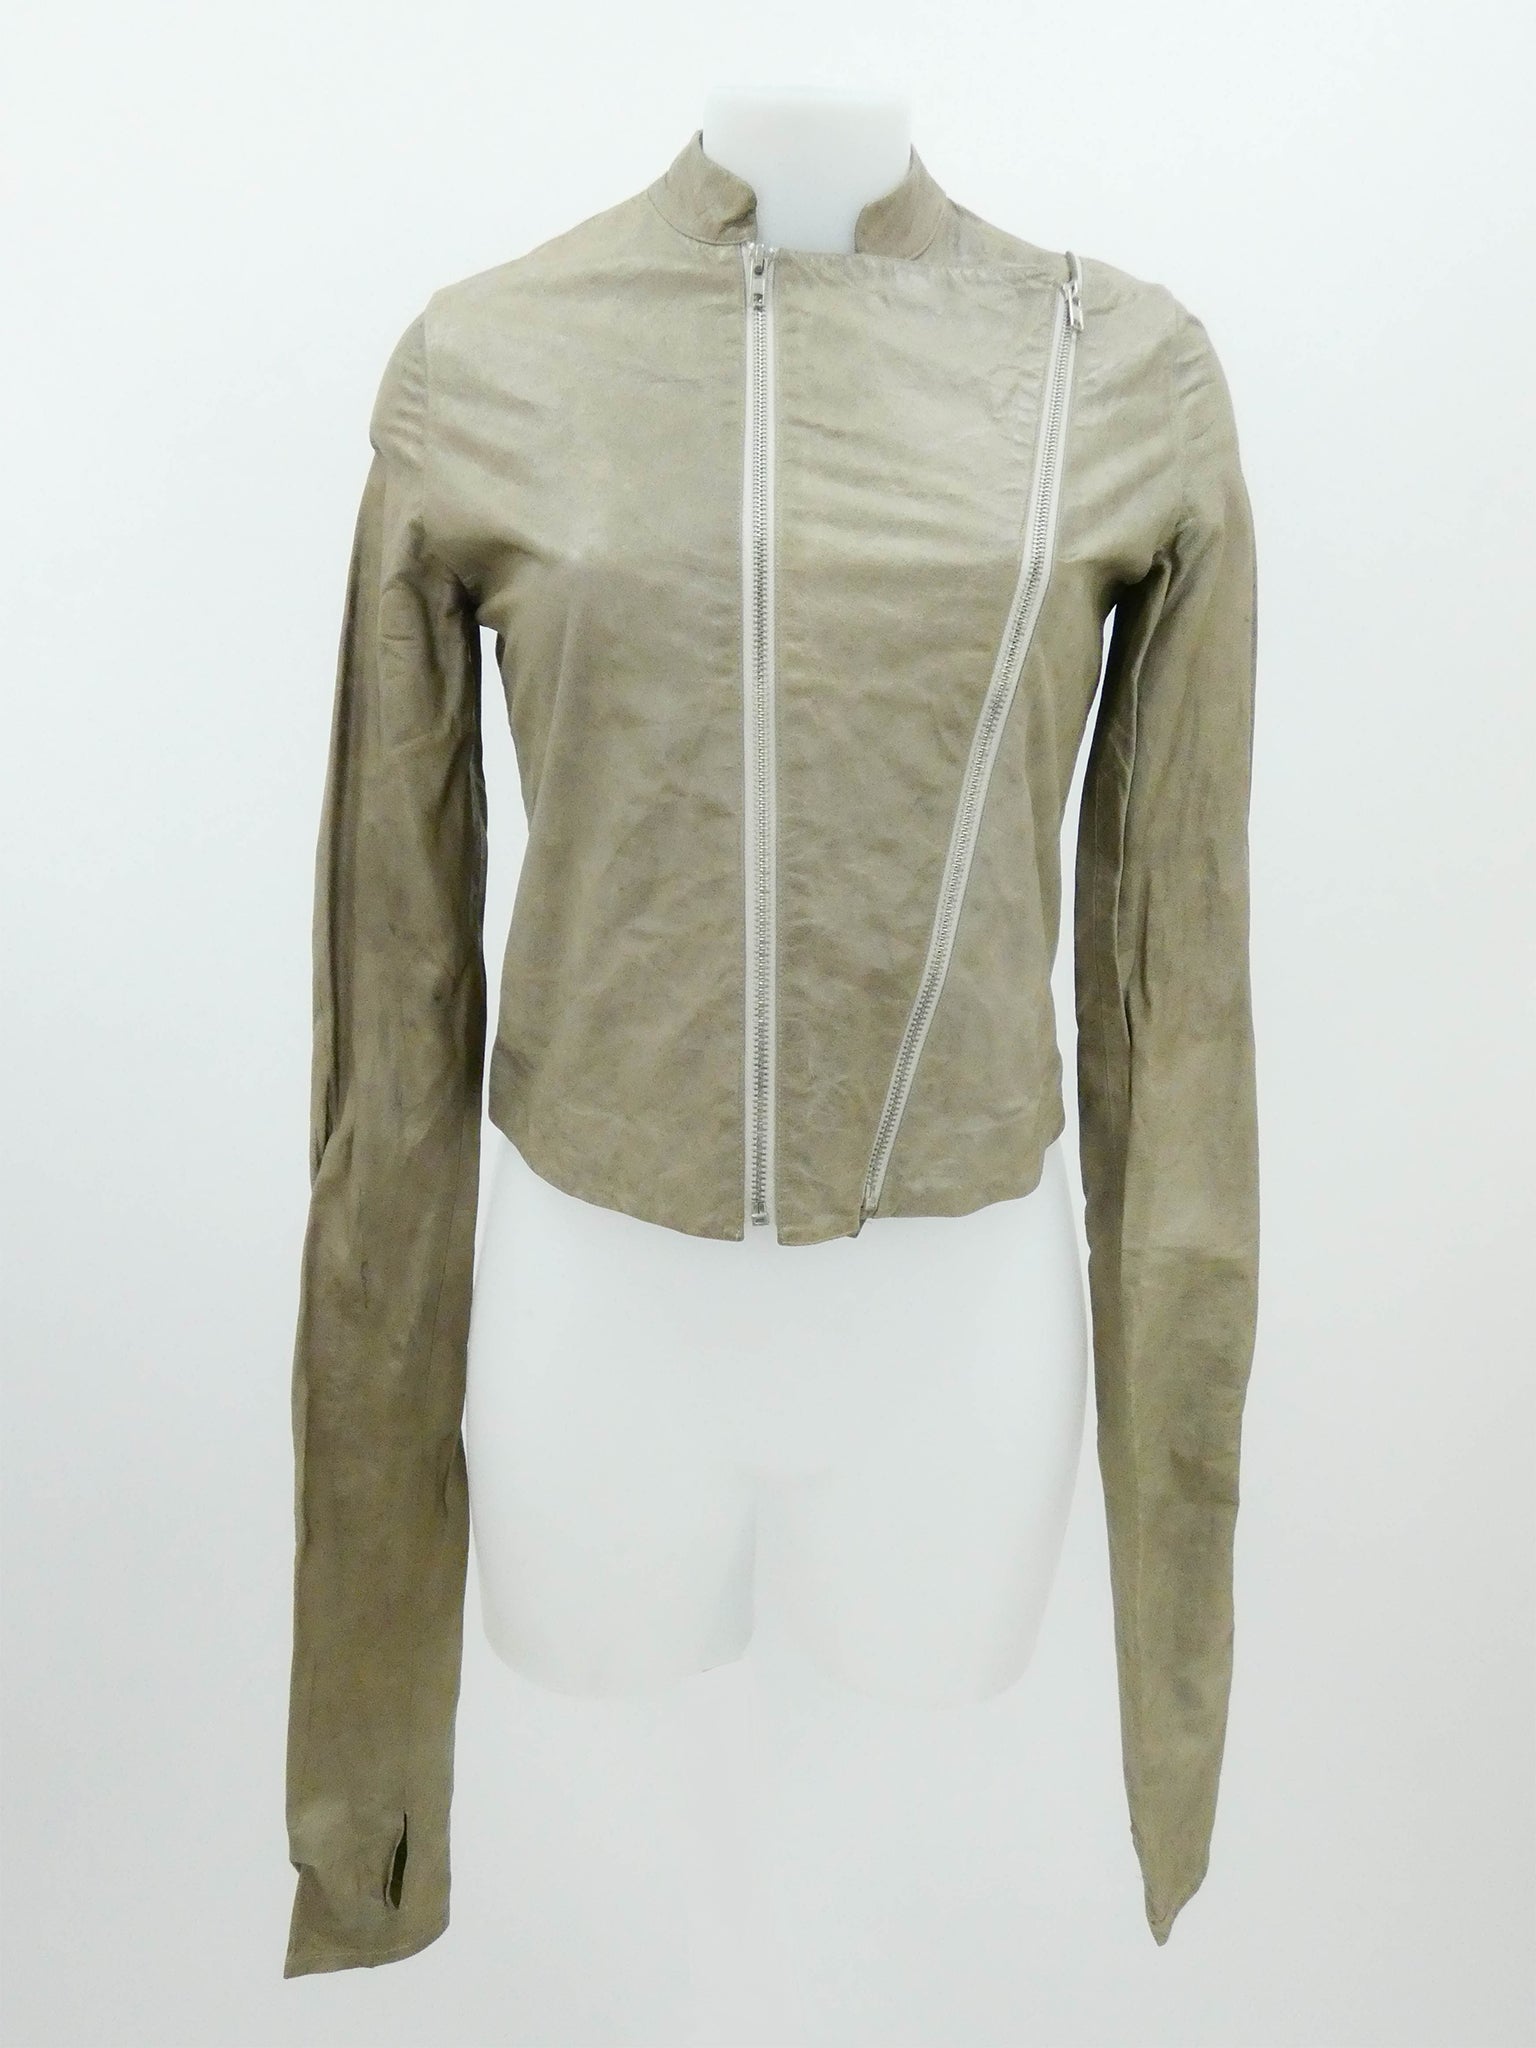 SIGNATURE BEIGE DOUBLE ZIP PAPER LEATHER JACKET WITH LONG SLEEVES